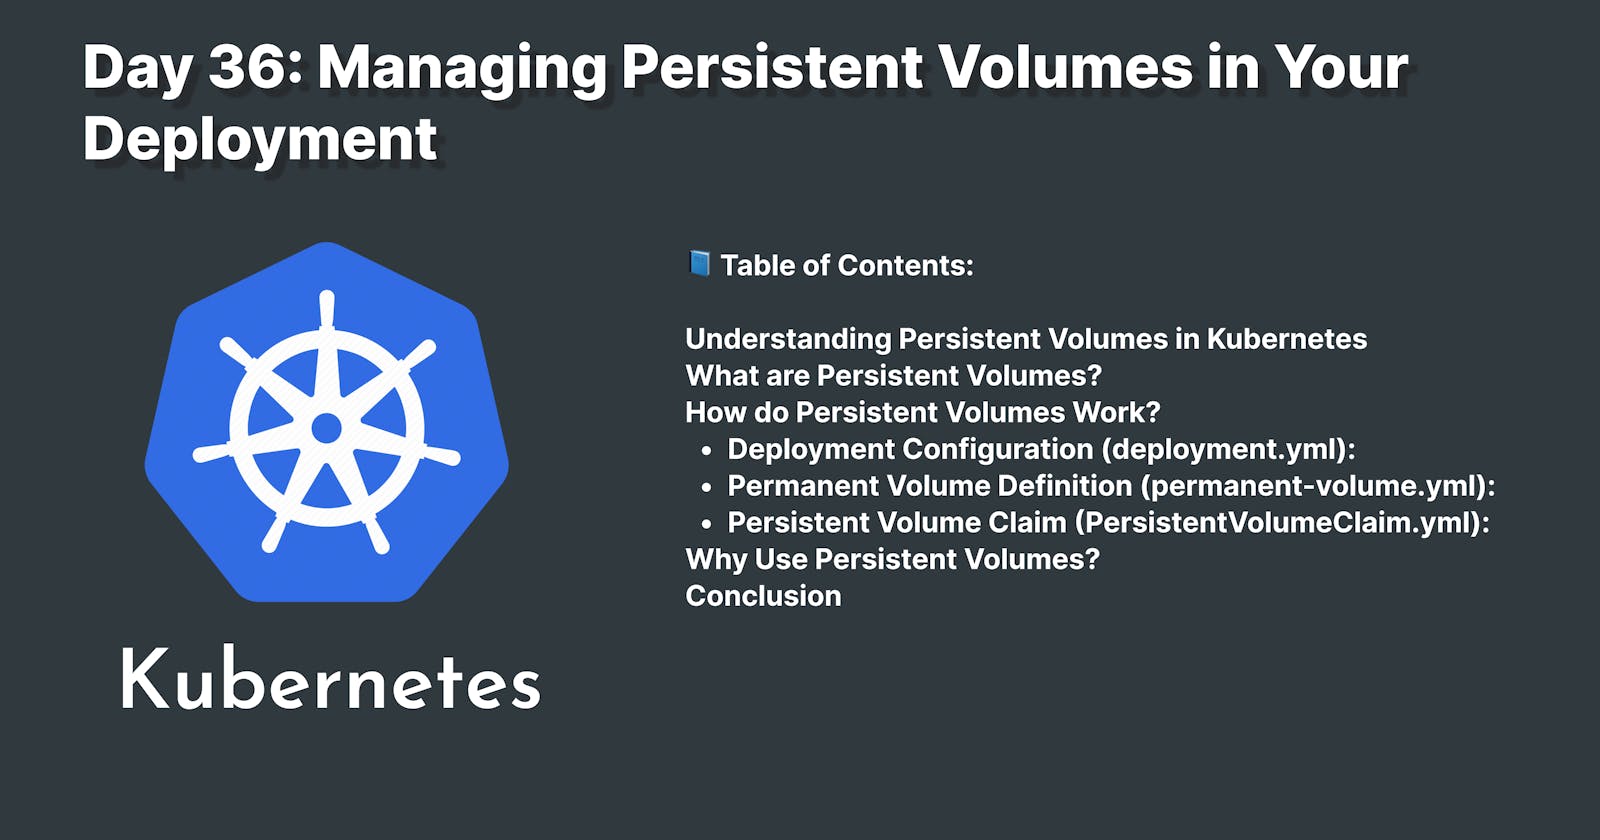 Day 36: Managing Persistent Volumes in Your Deployment